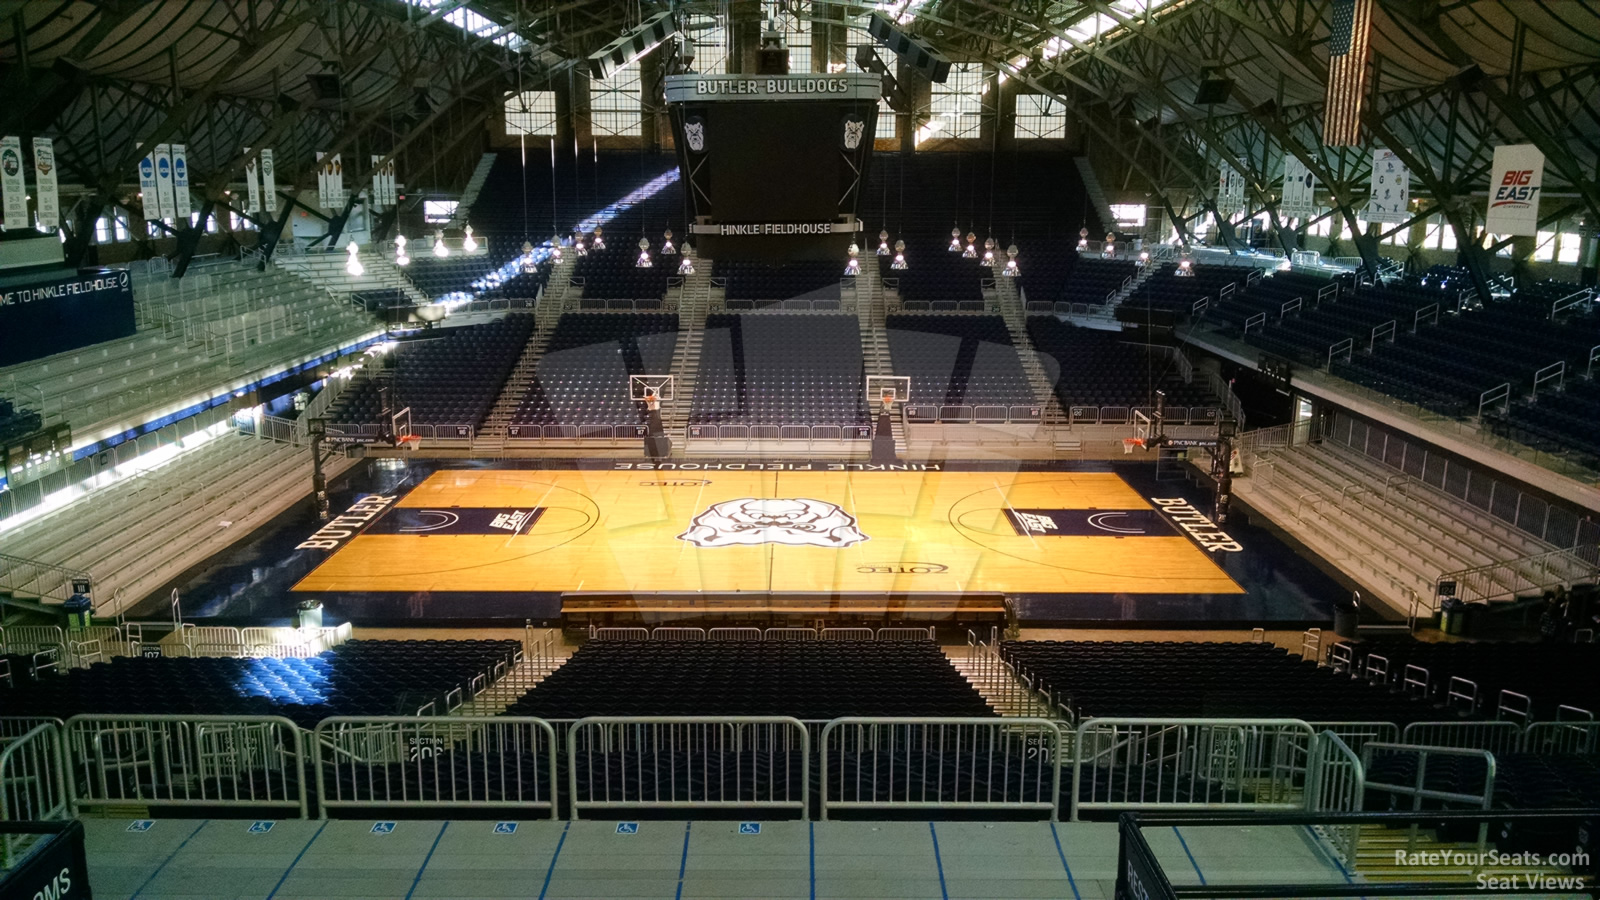 section 306, row 7 seat view  - hinkle fieldhouse